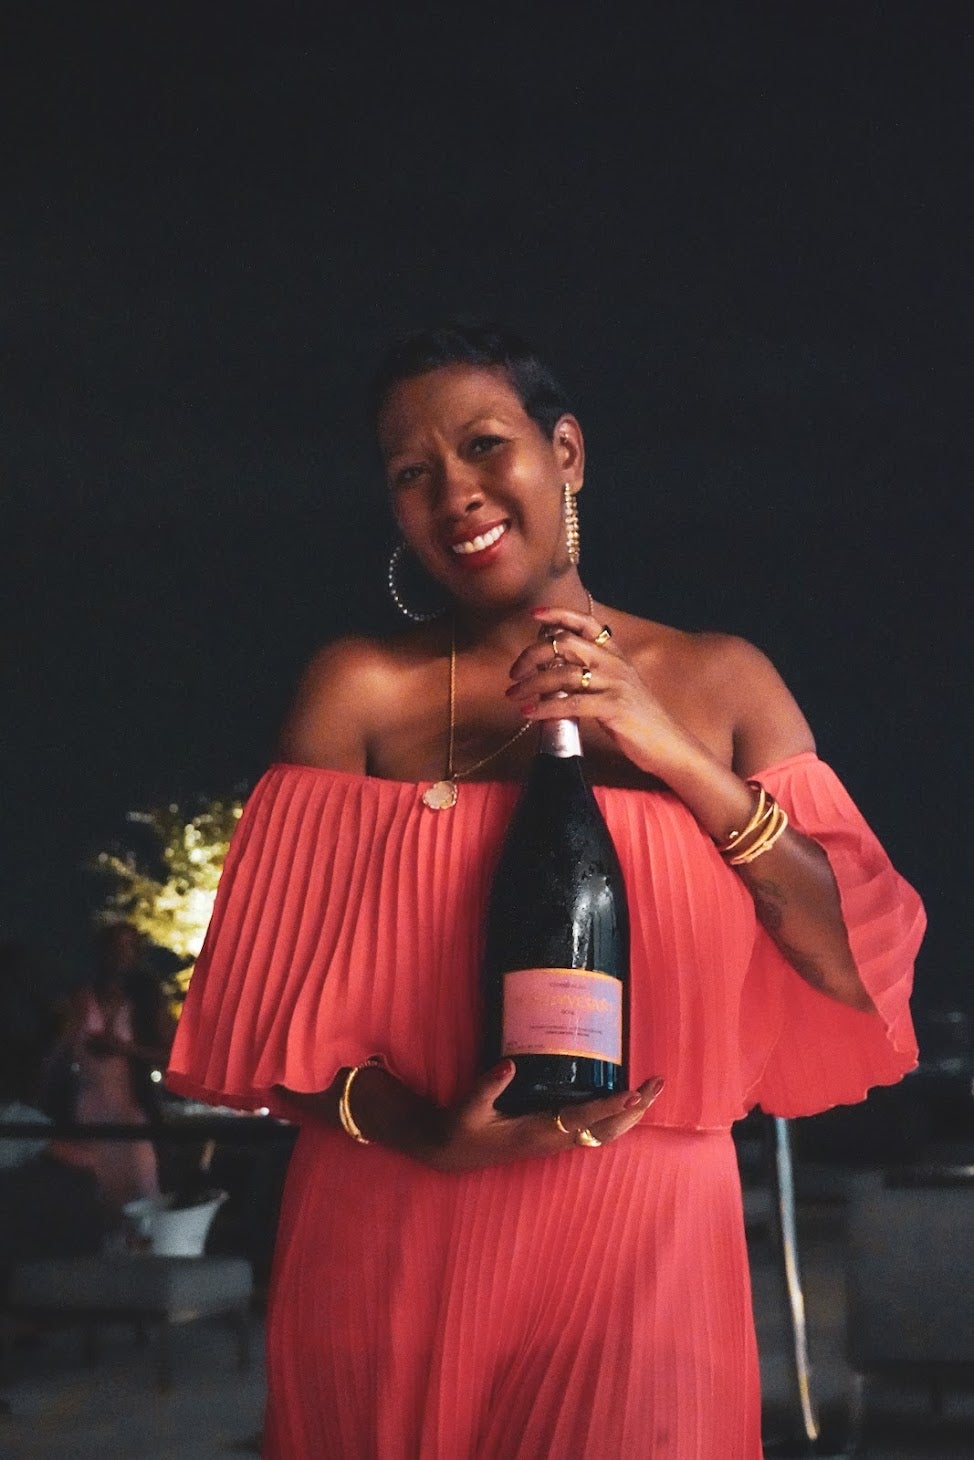 Meet Some of the Black Women Taking Up Space in France’s Wine Regions